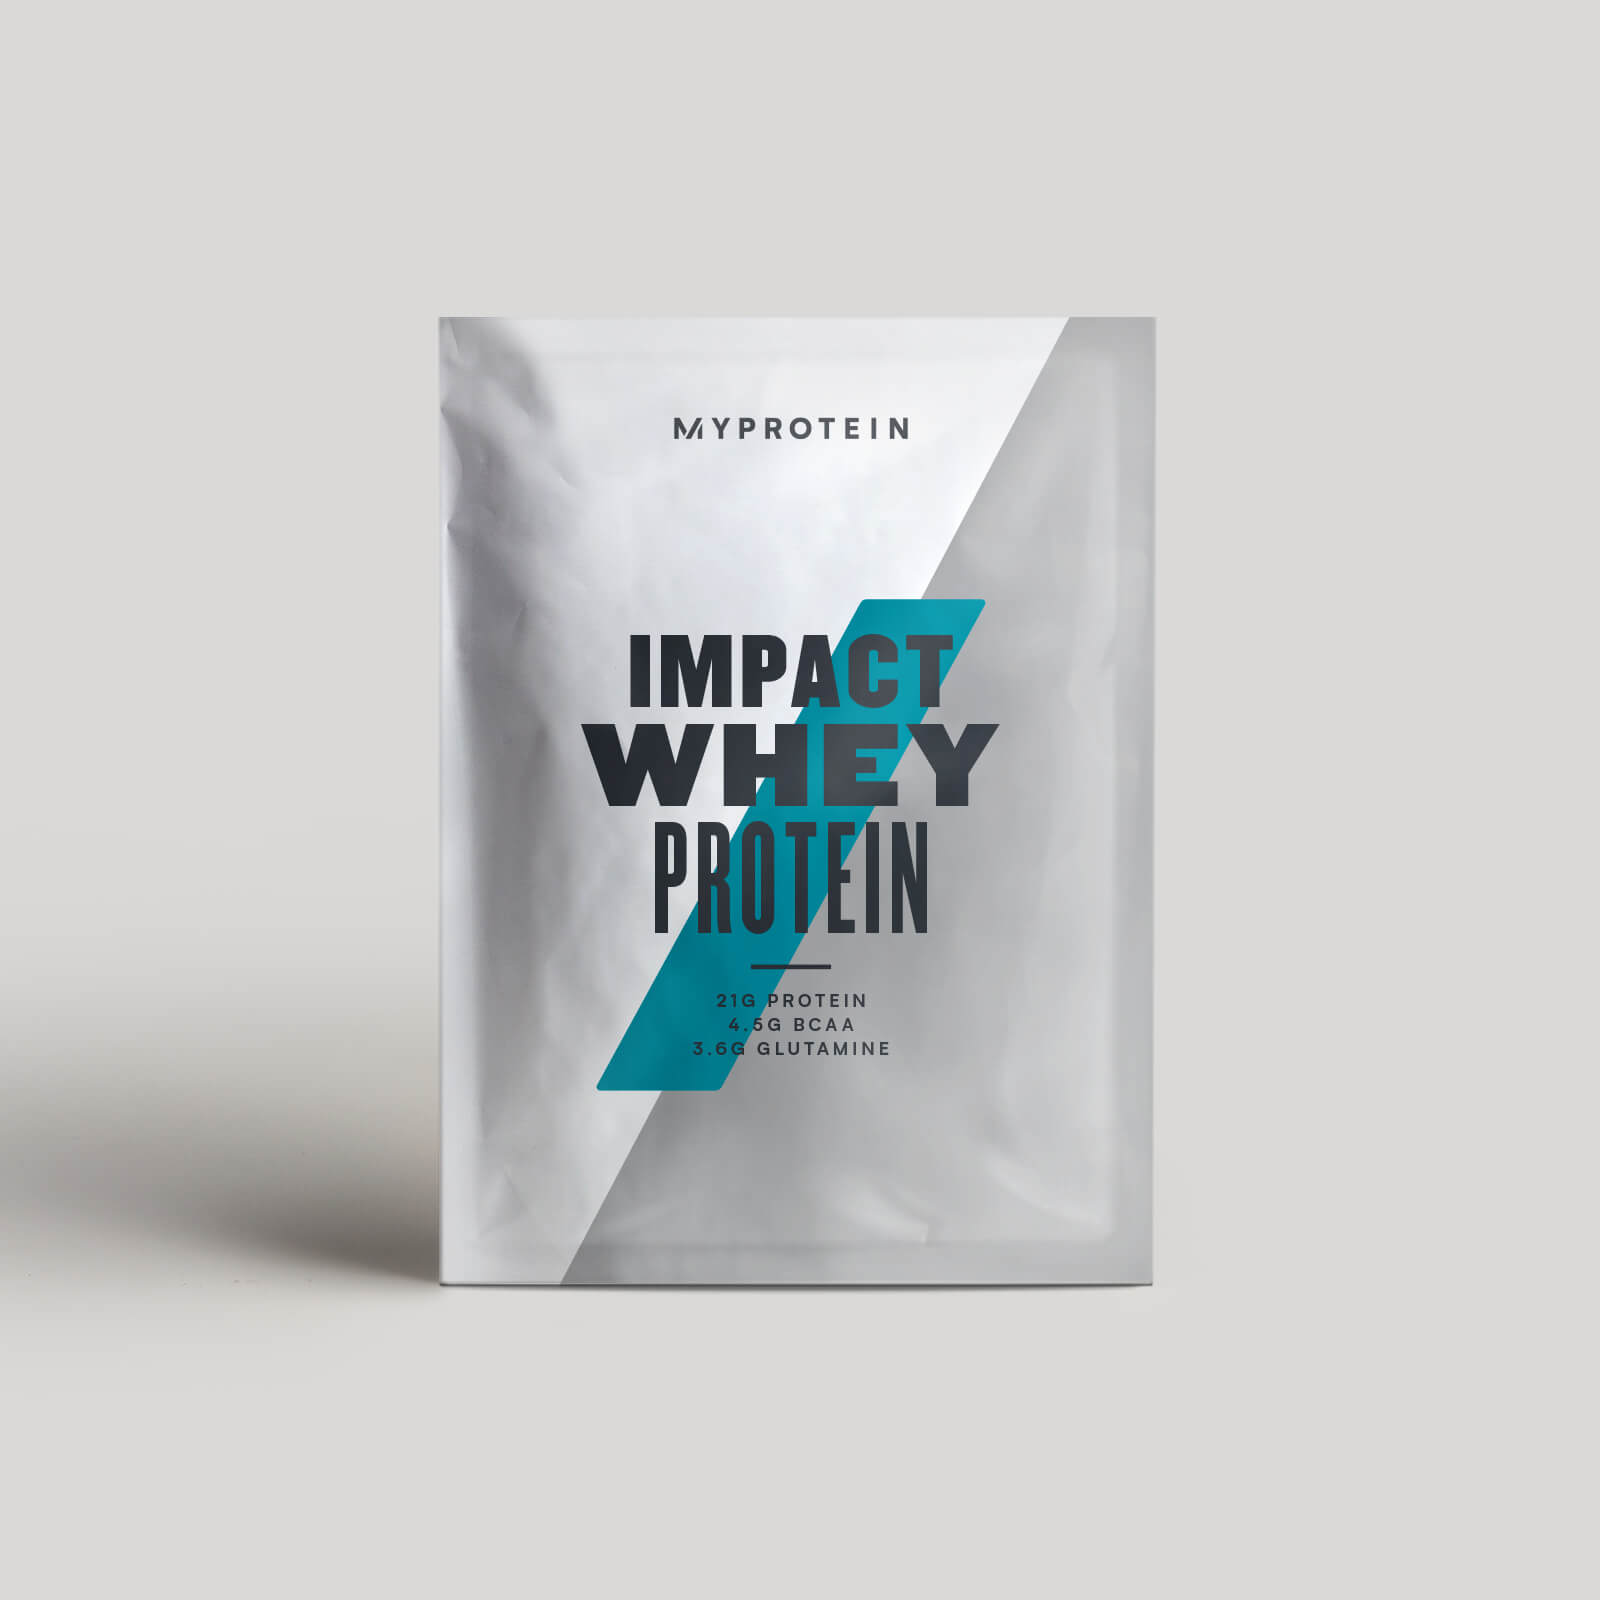 Impact Whey Protein (Amostra) - 25g - Chocolate Suave